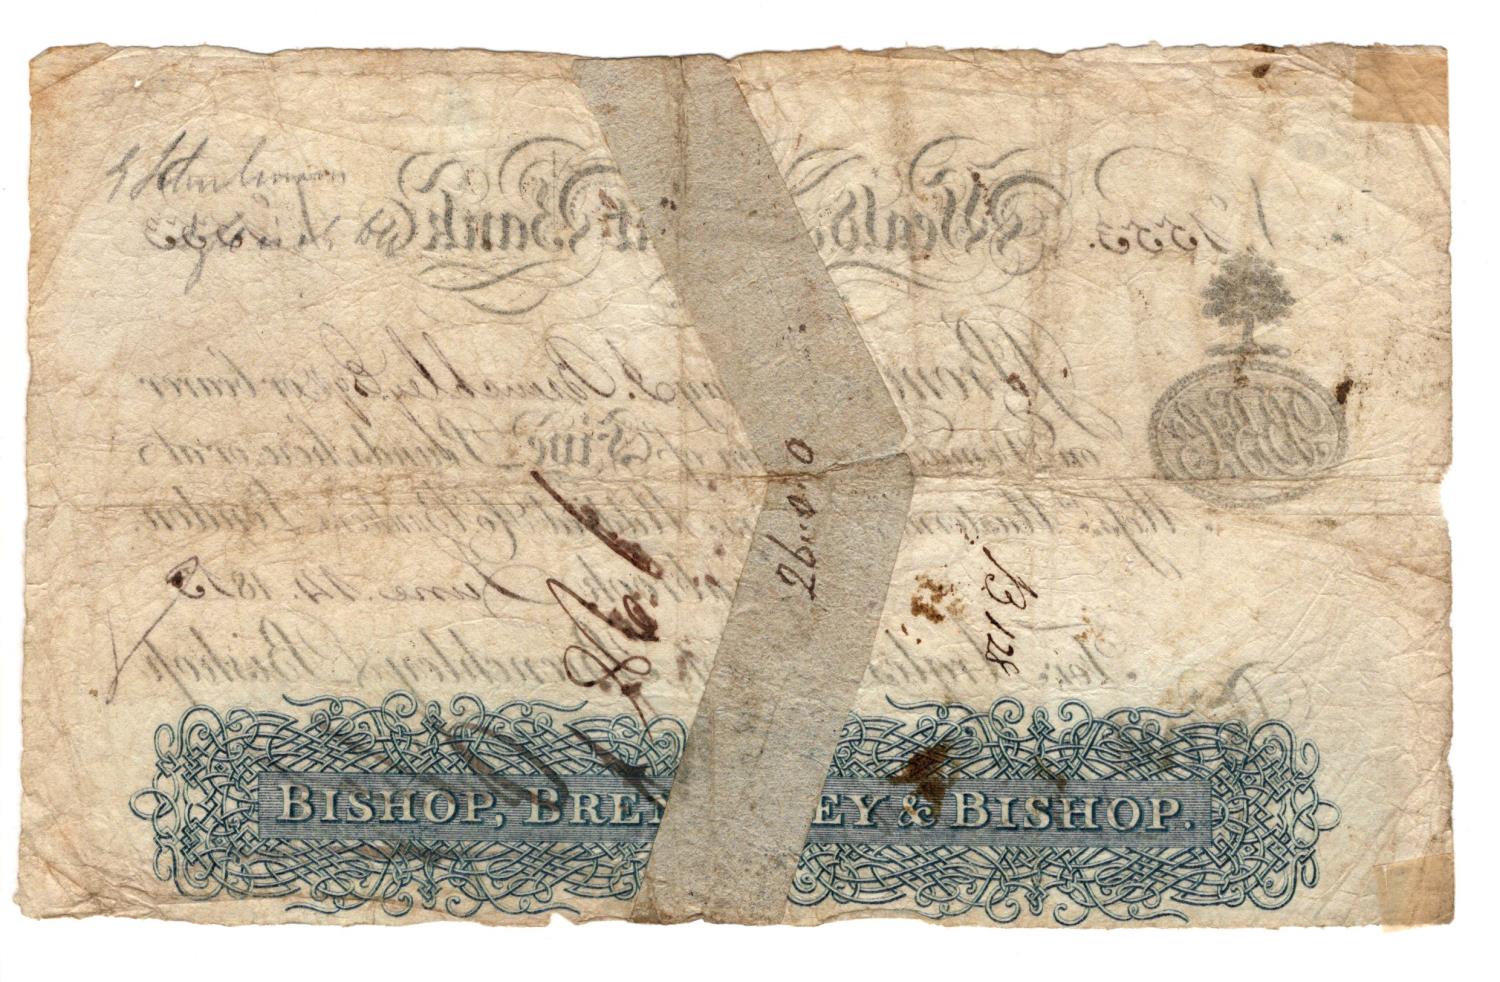 Weald of Kent Bank Cranbrook 5 Pounds dated 1813, serial No. 1553 for Argles Bishop, Benchley & - Image 2 of 2